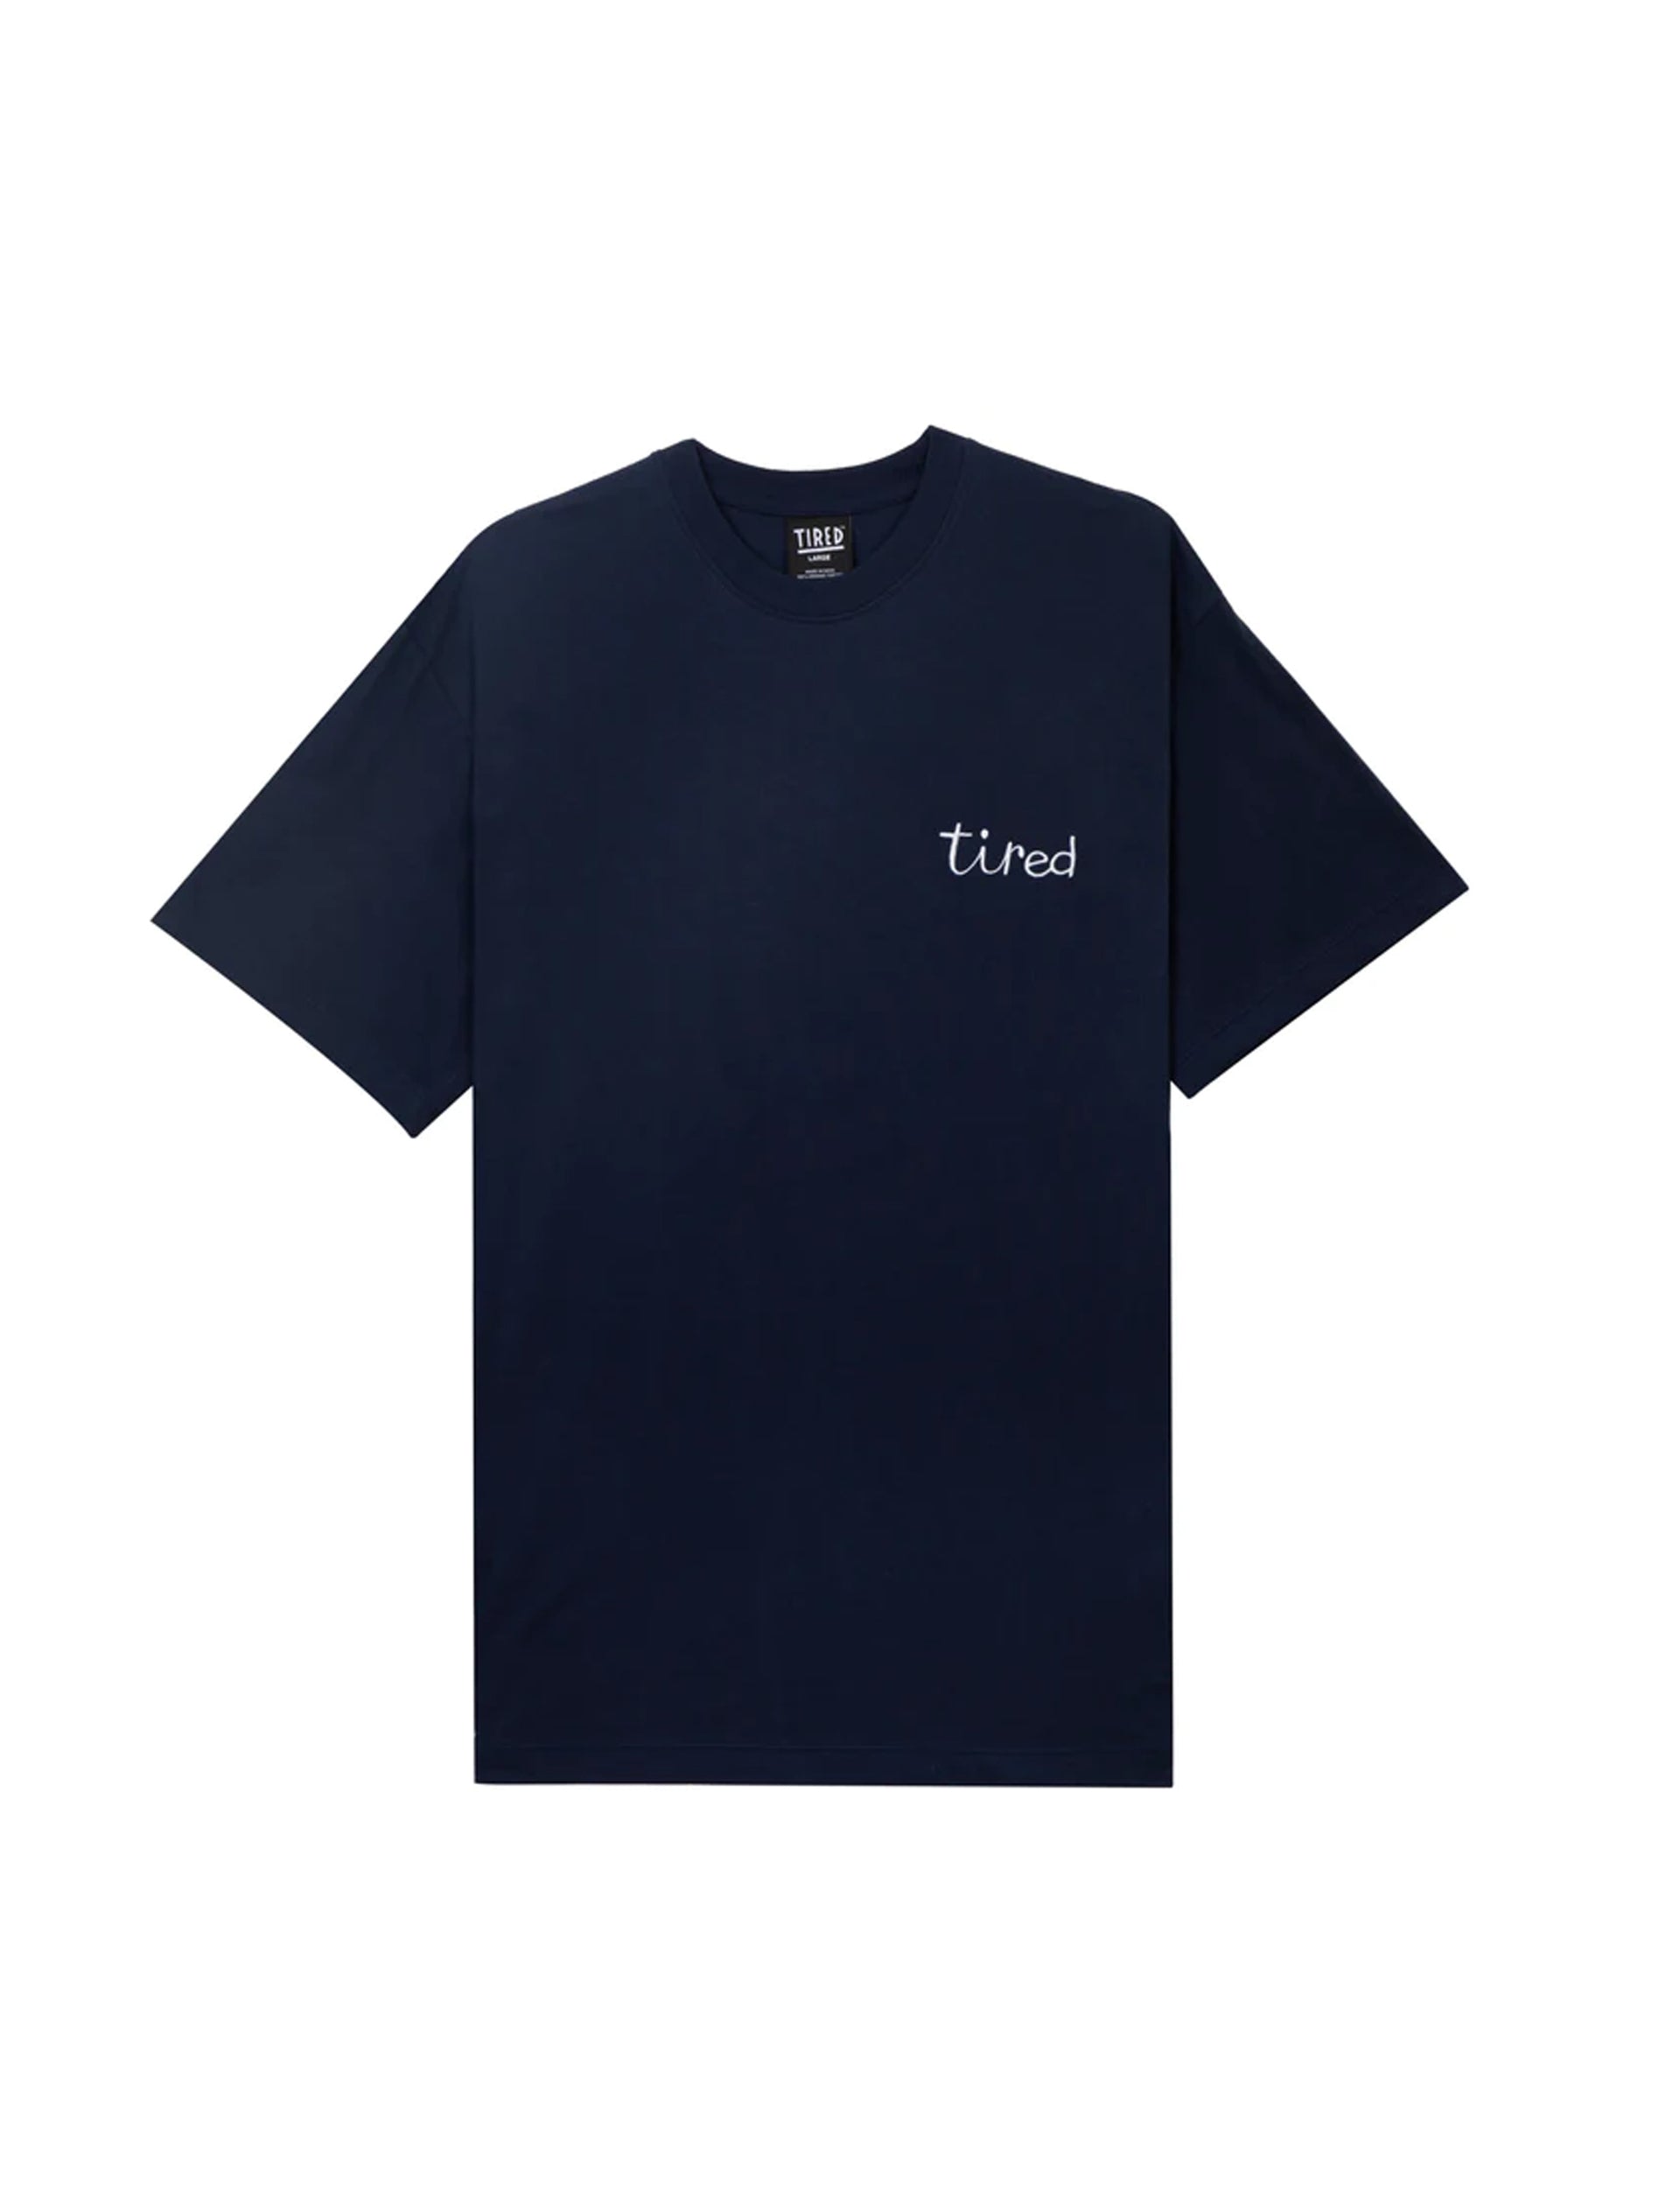 TIRED THE SHIP HAS SAILED SS TEE NAVY